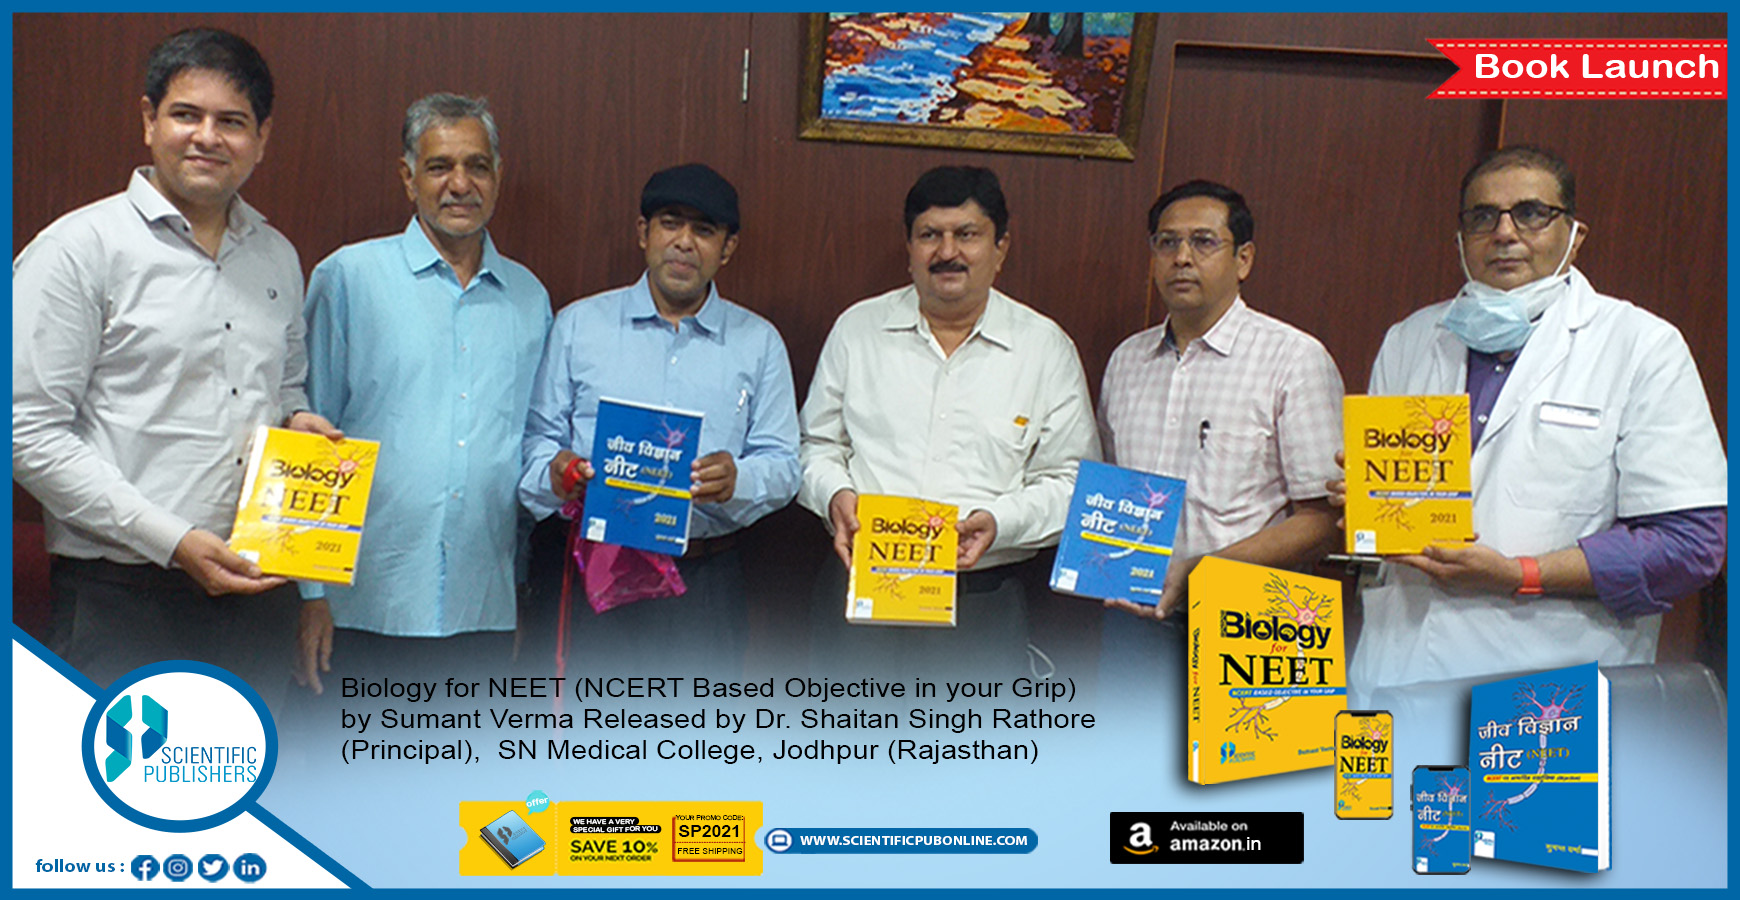 Book Launch Biology for NEET (NCERT Based Objective in your Grip) by Sumant Verma.